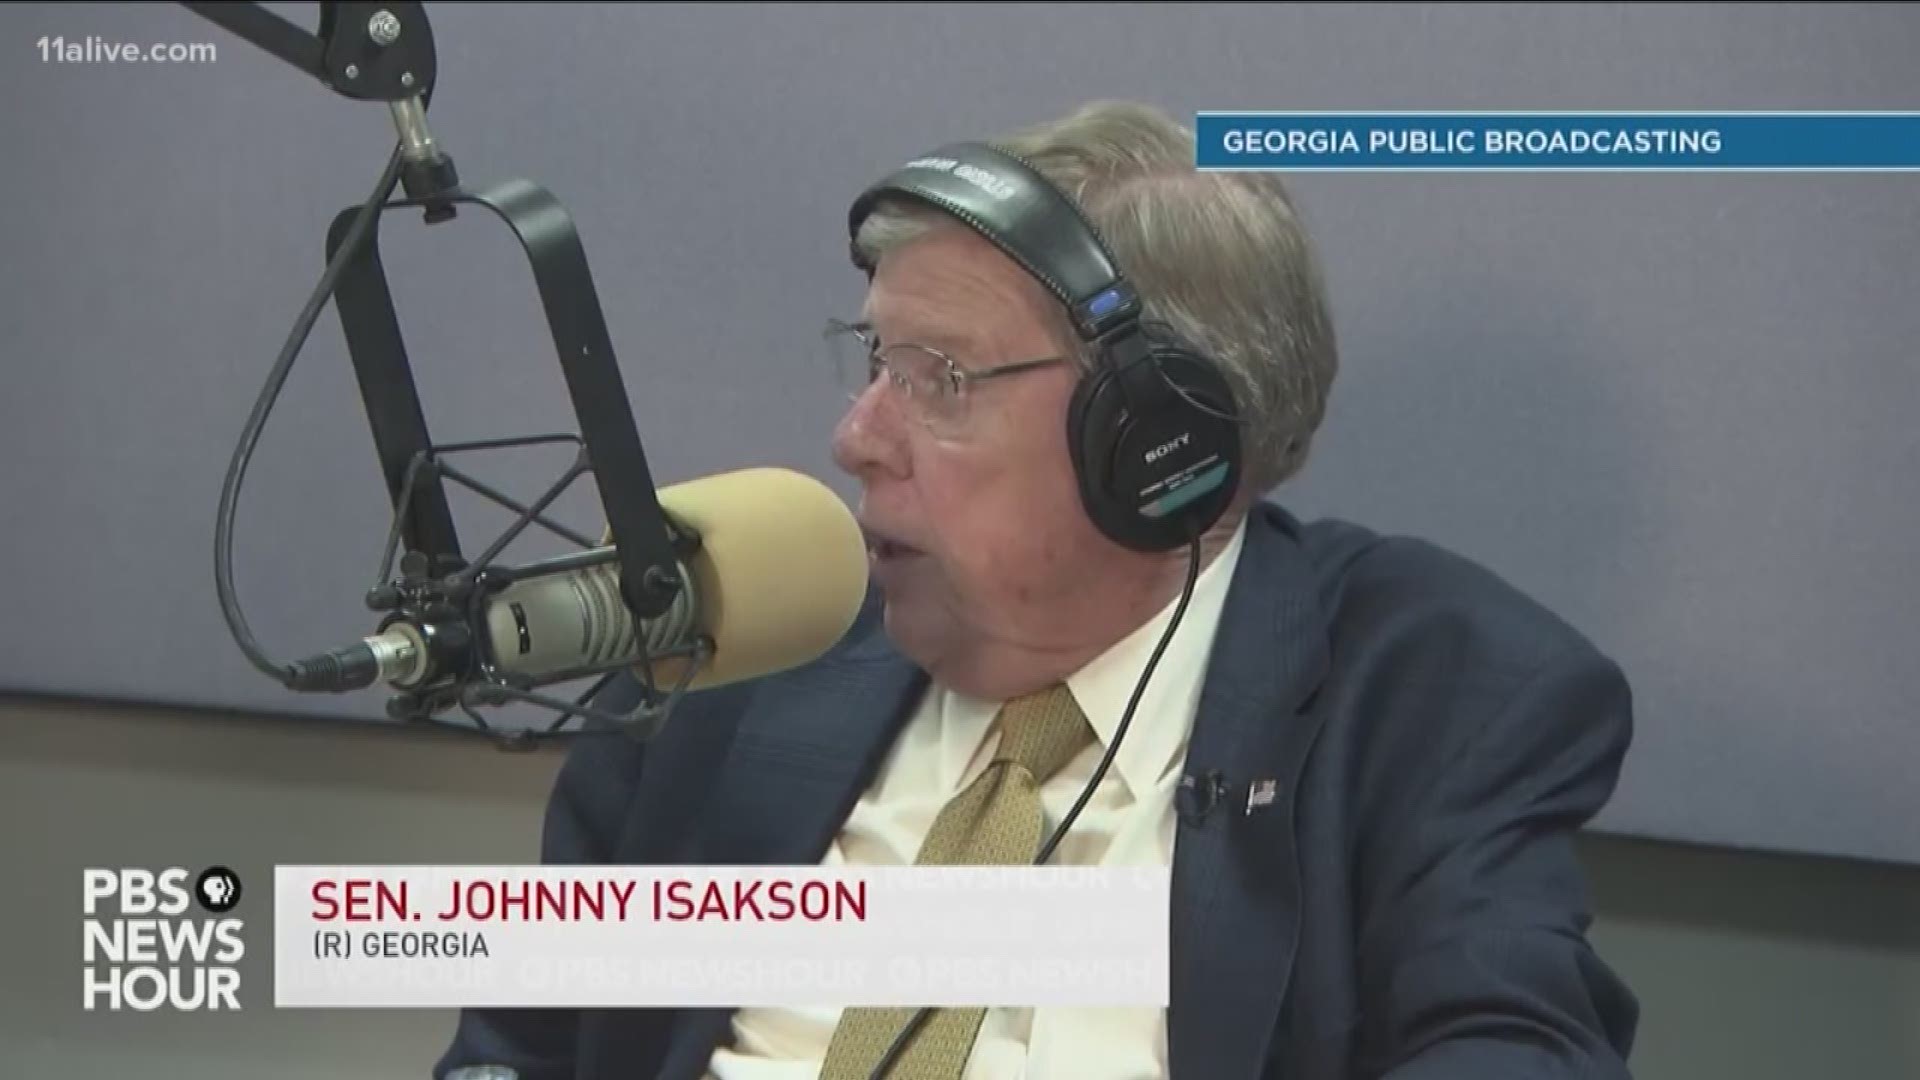 "We should never reduce the service that people give to this country," Isakson said.